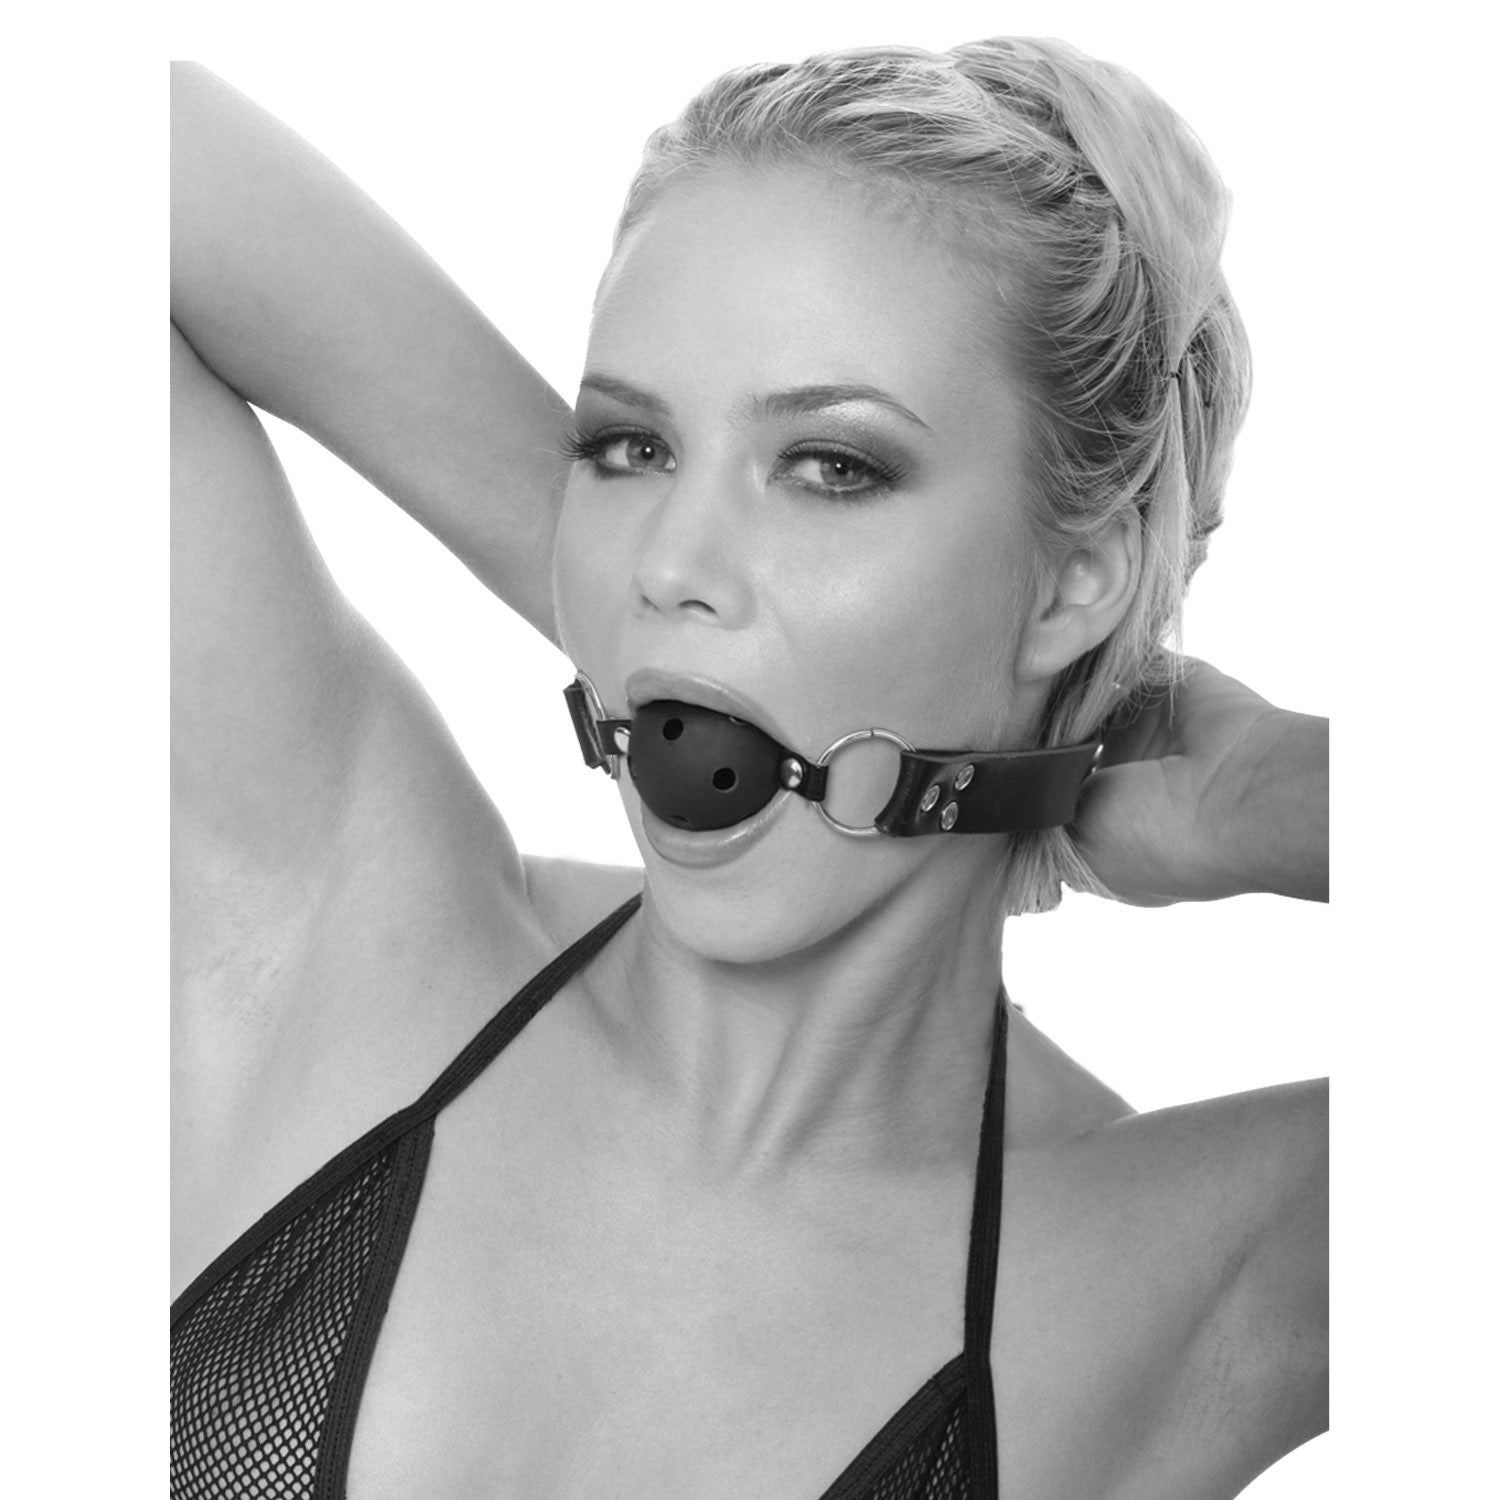 Fetish Fantasy Series Limited Edition Breathable Ball Gag - Black Ball Gag by Pipedream